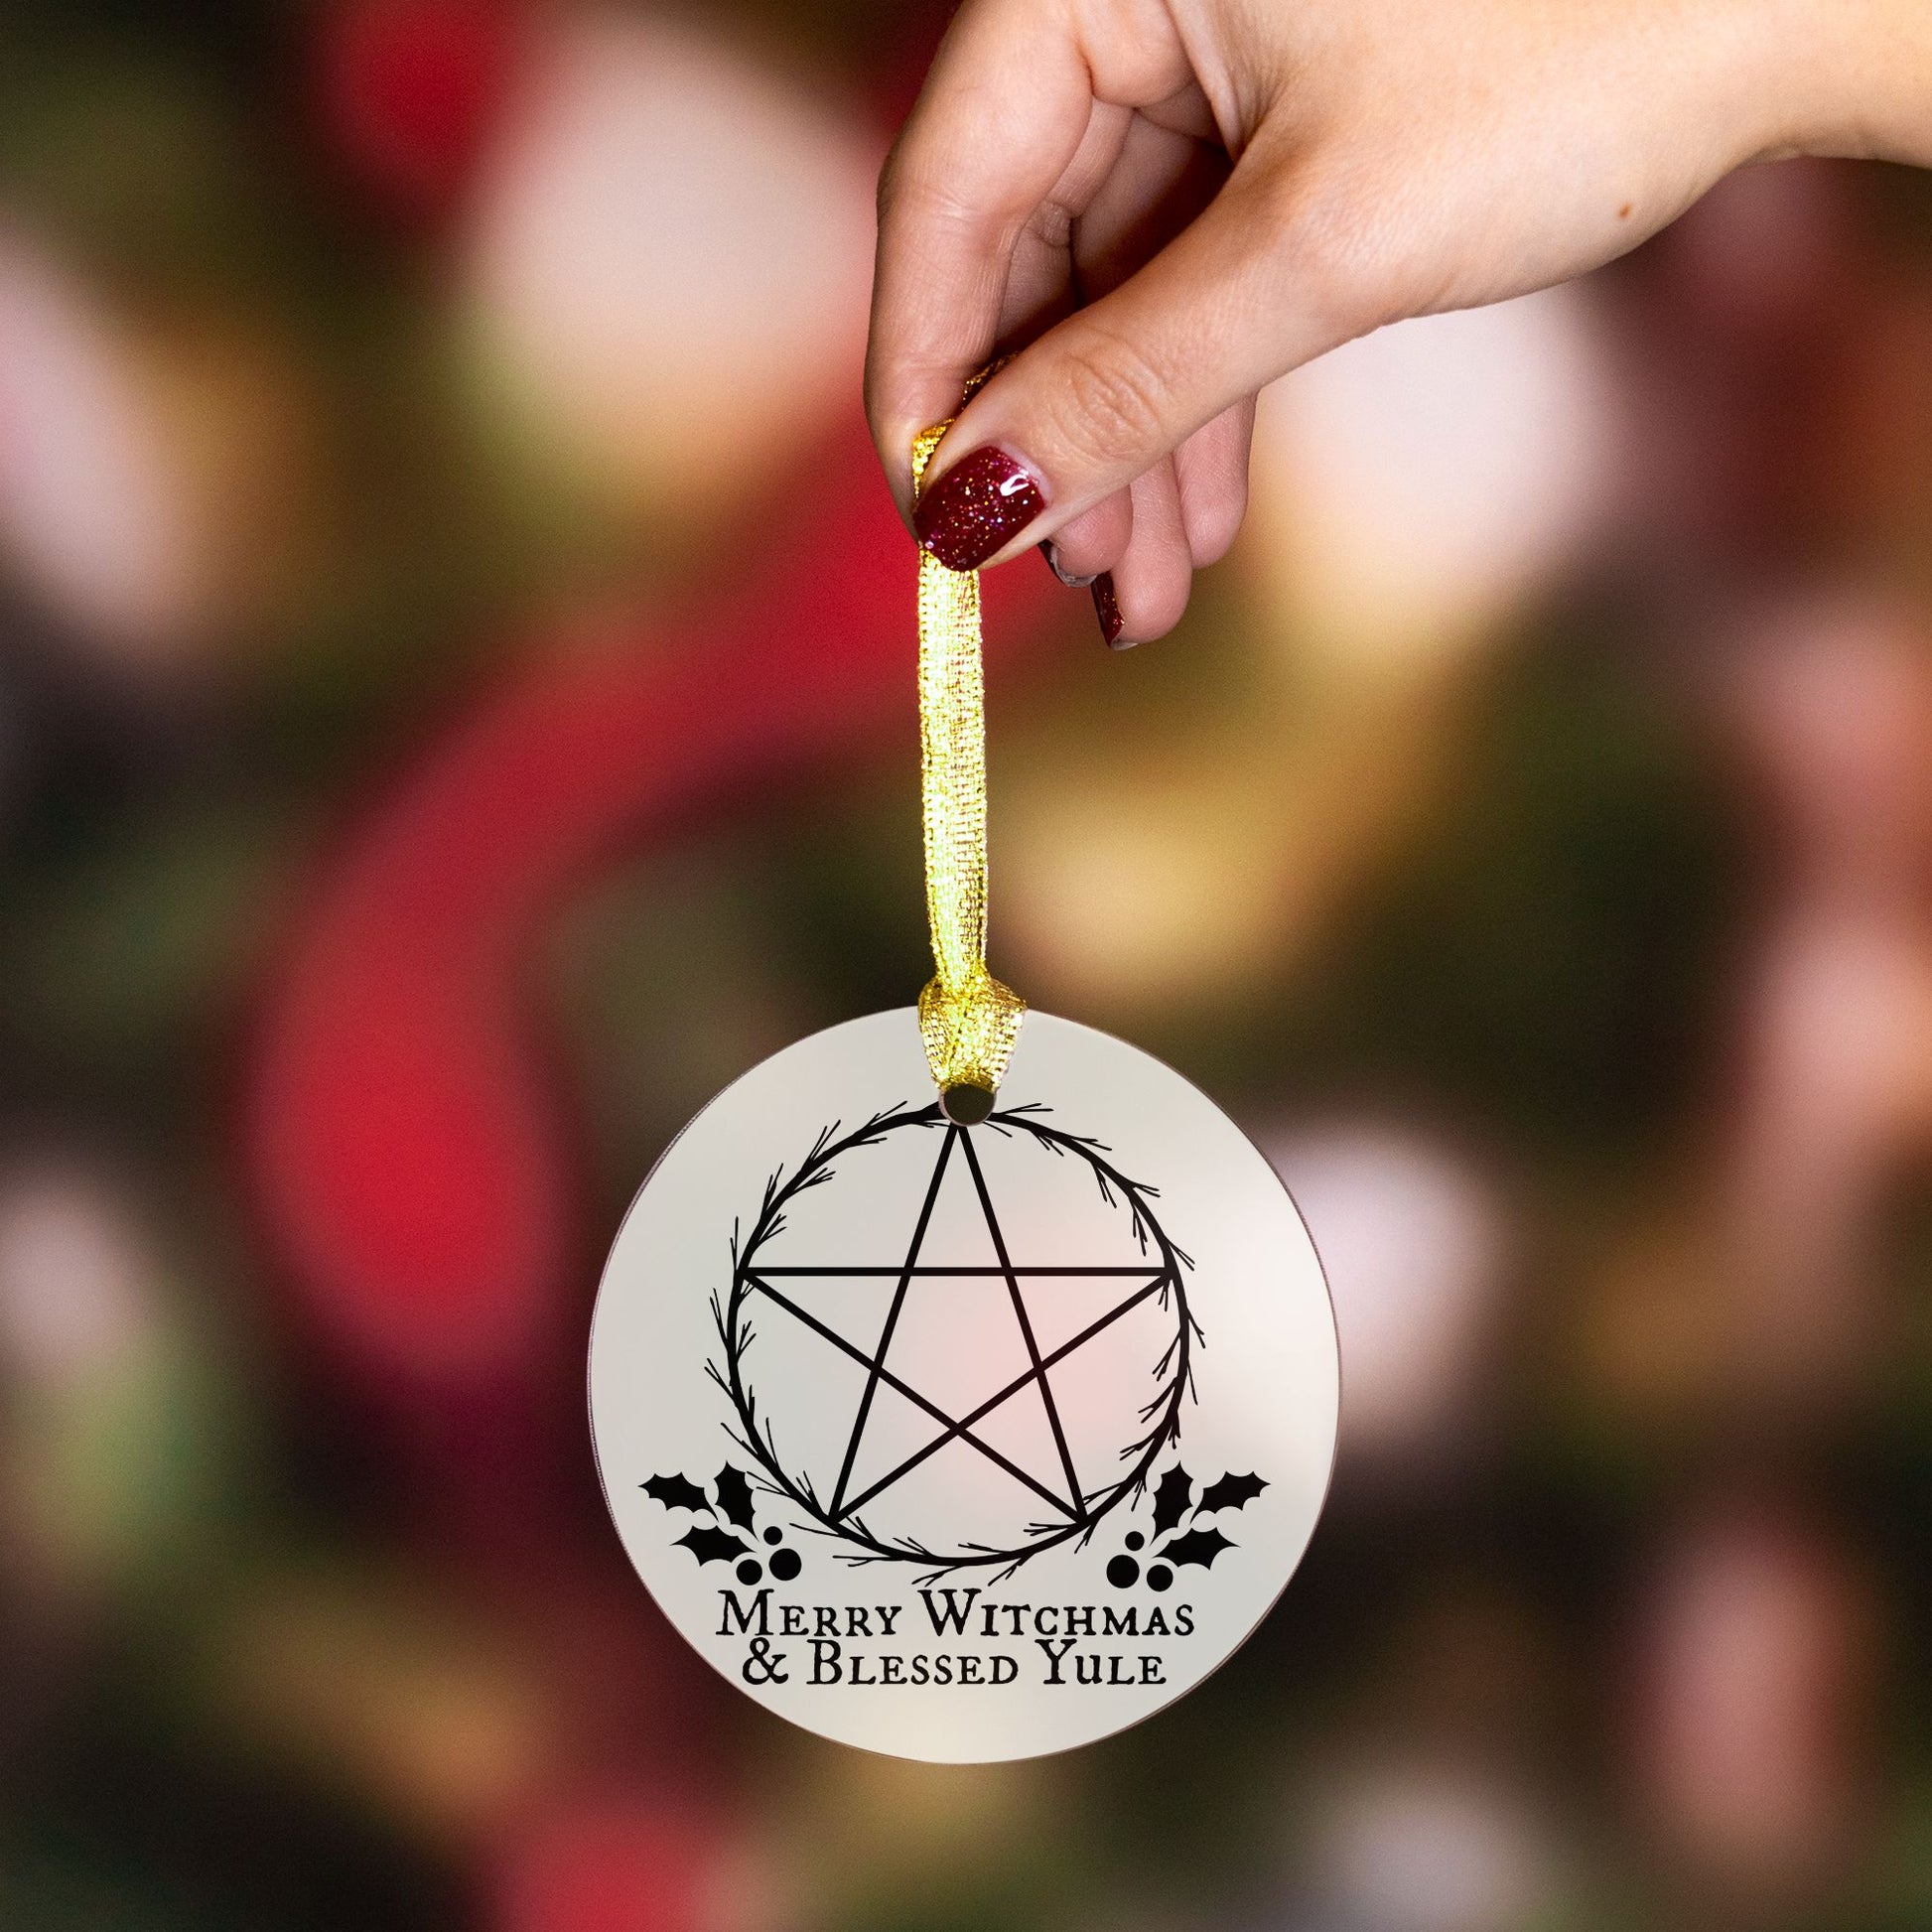 Merry Witchmas Ornament